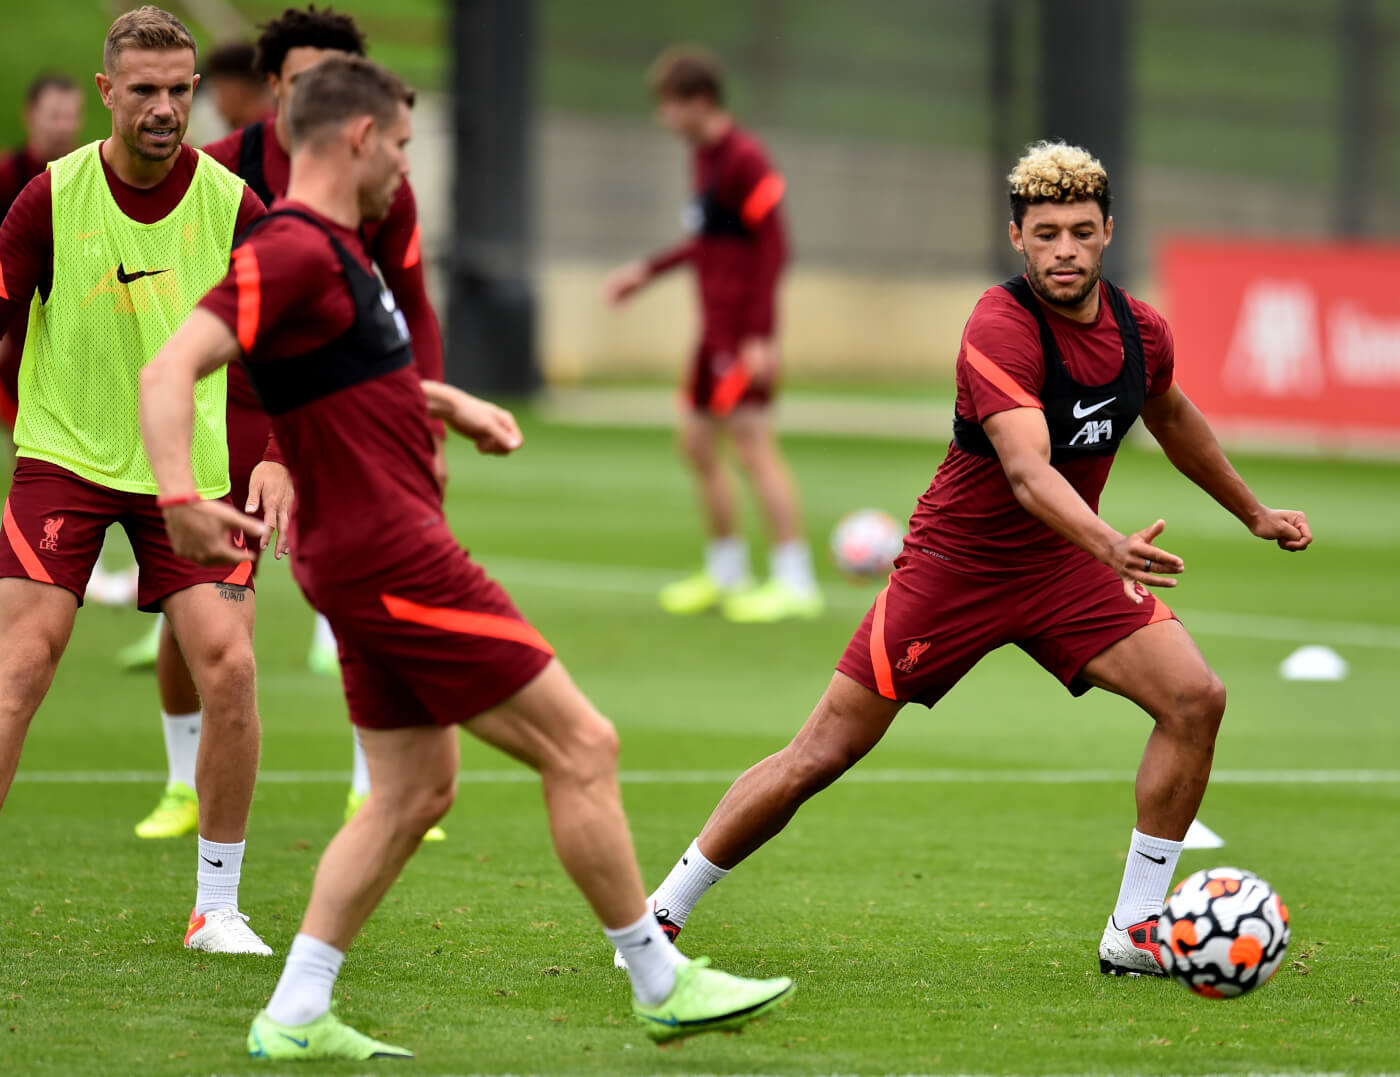 Nine fresh players have joined Liverpool's first team for preseason training